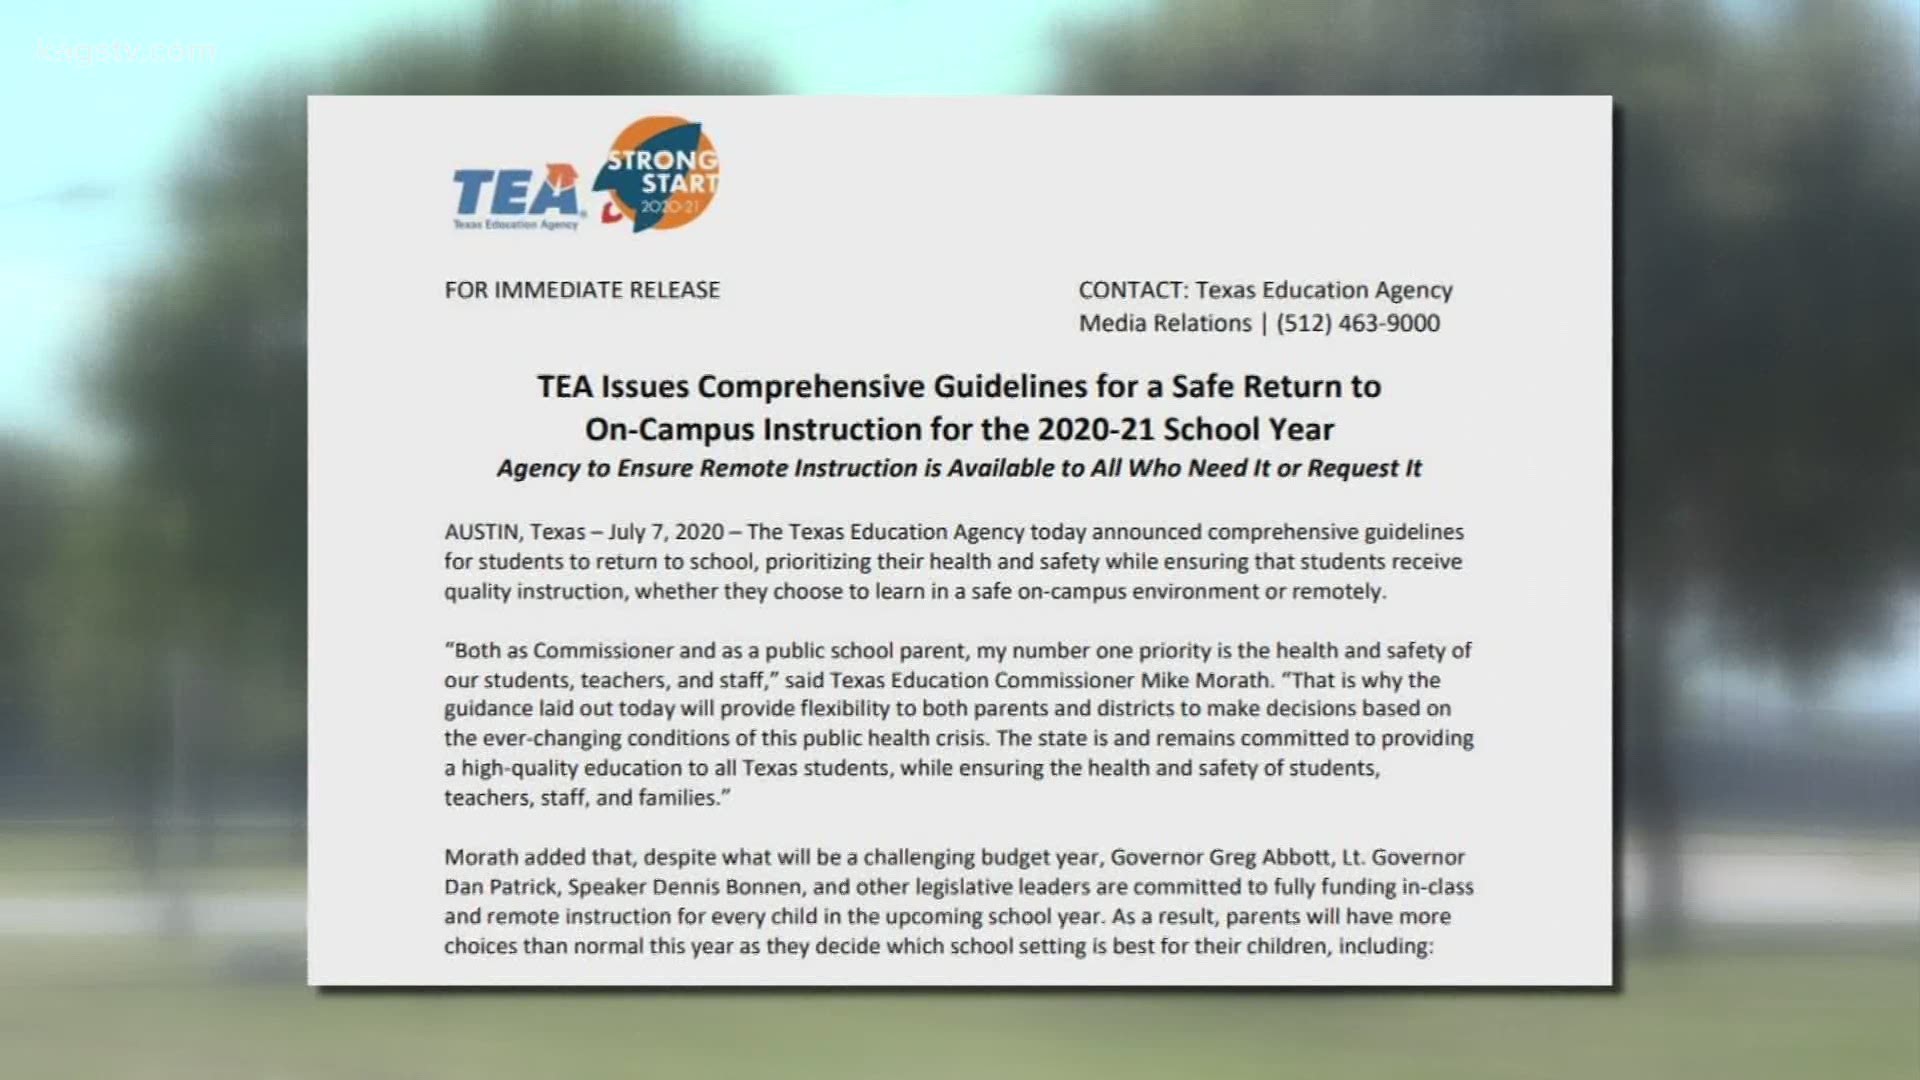 TEA shares intentions for 2020-2021 school year